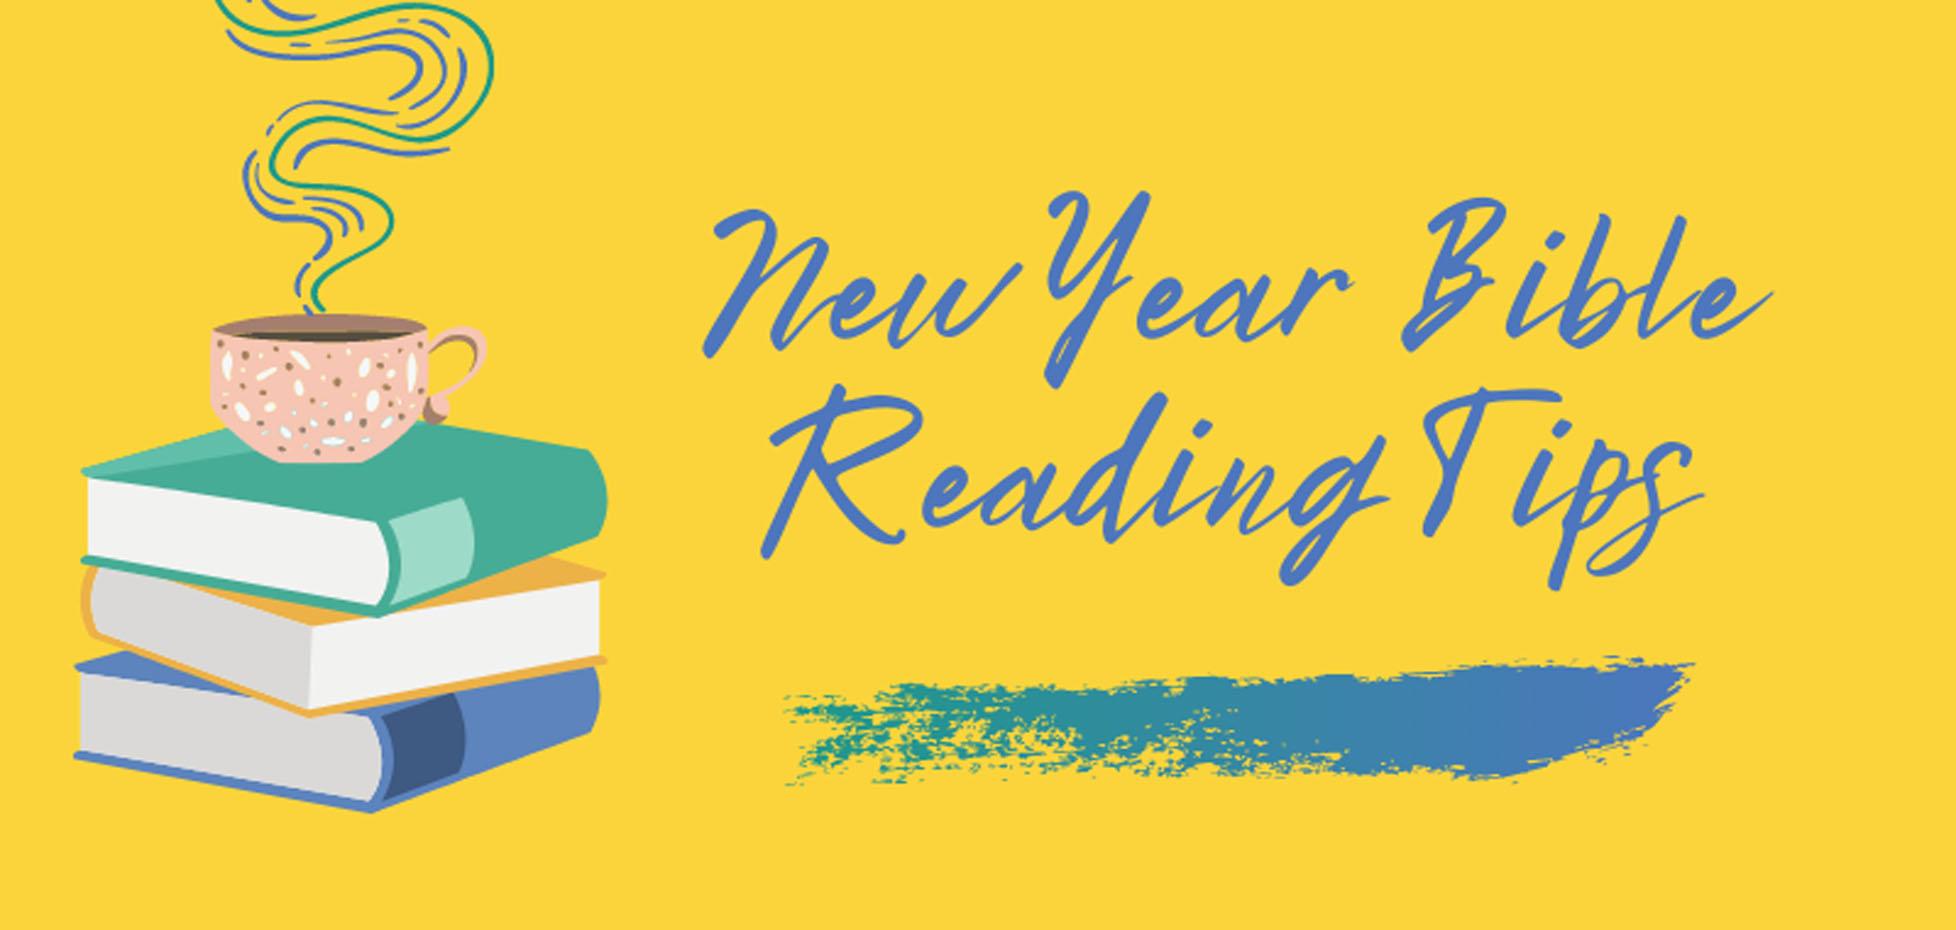 New Year Bible Reading Tips